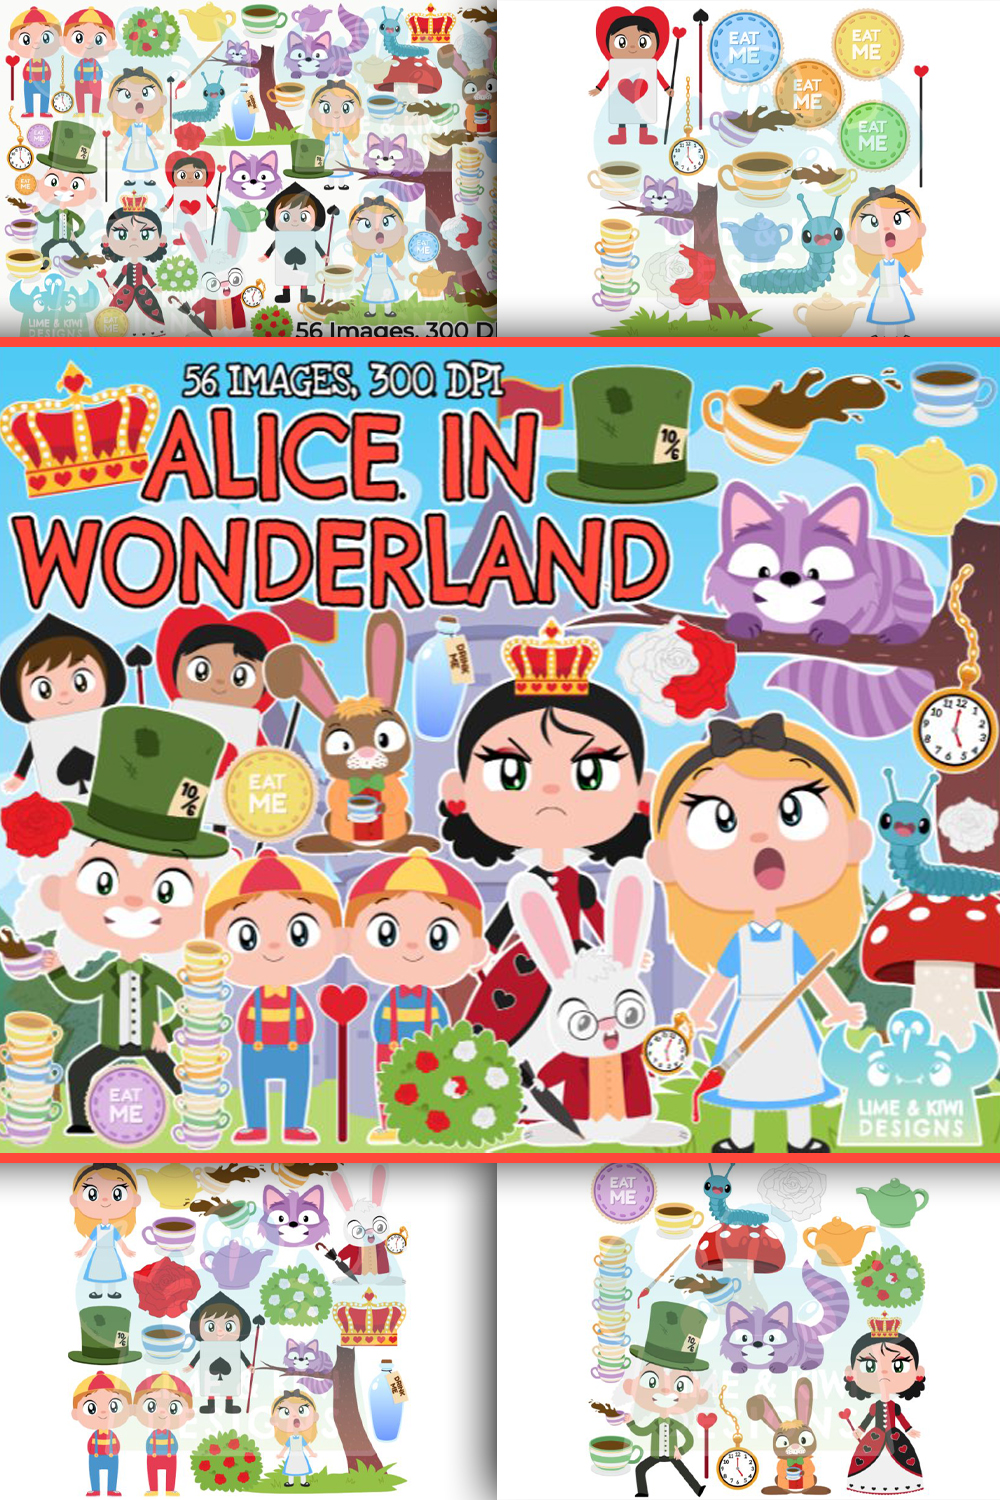 Alice in wonderland clipart lime and kiwi designs of pinterest.